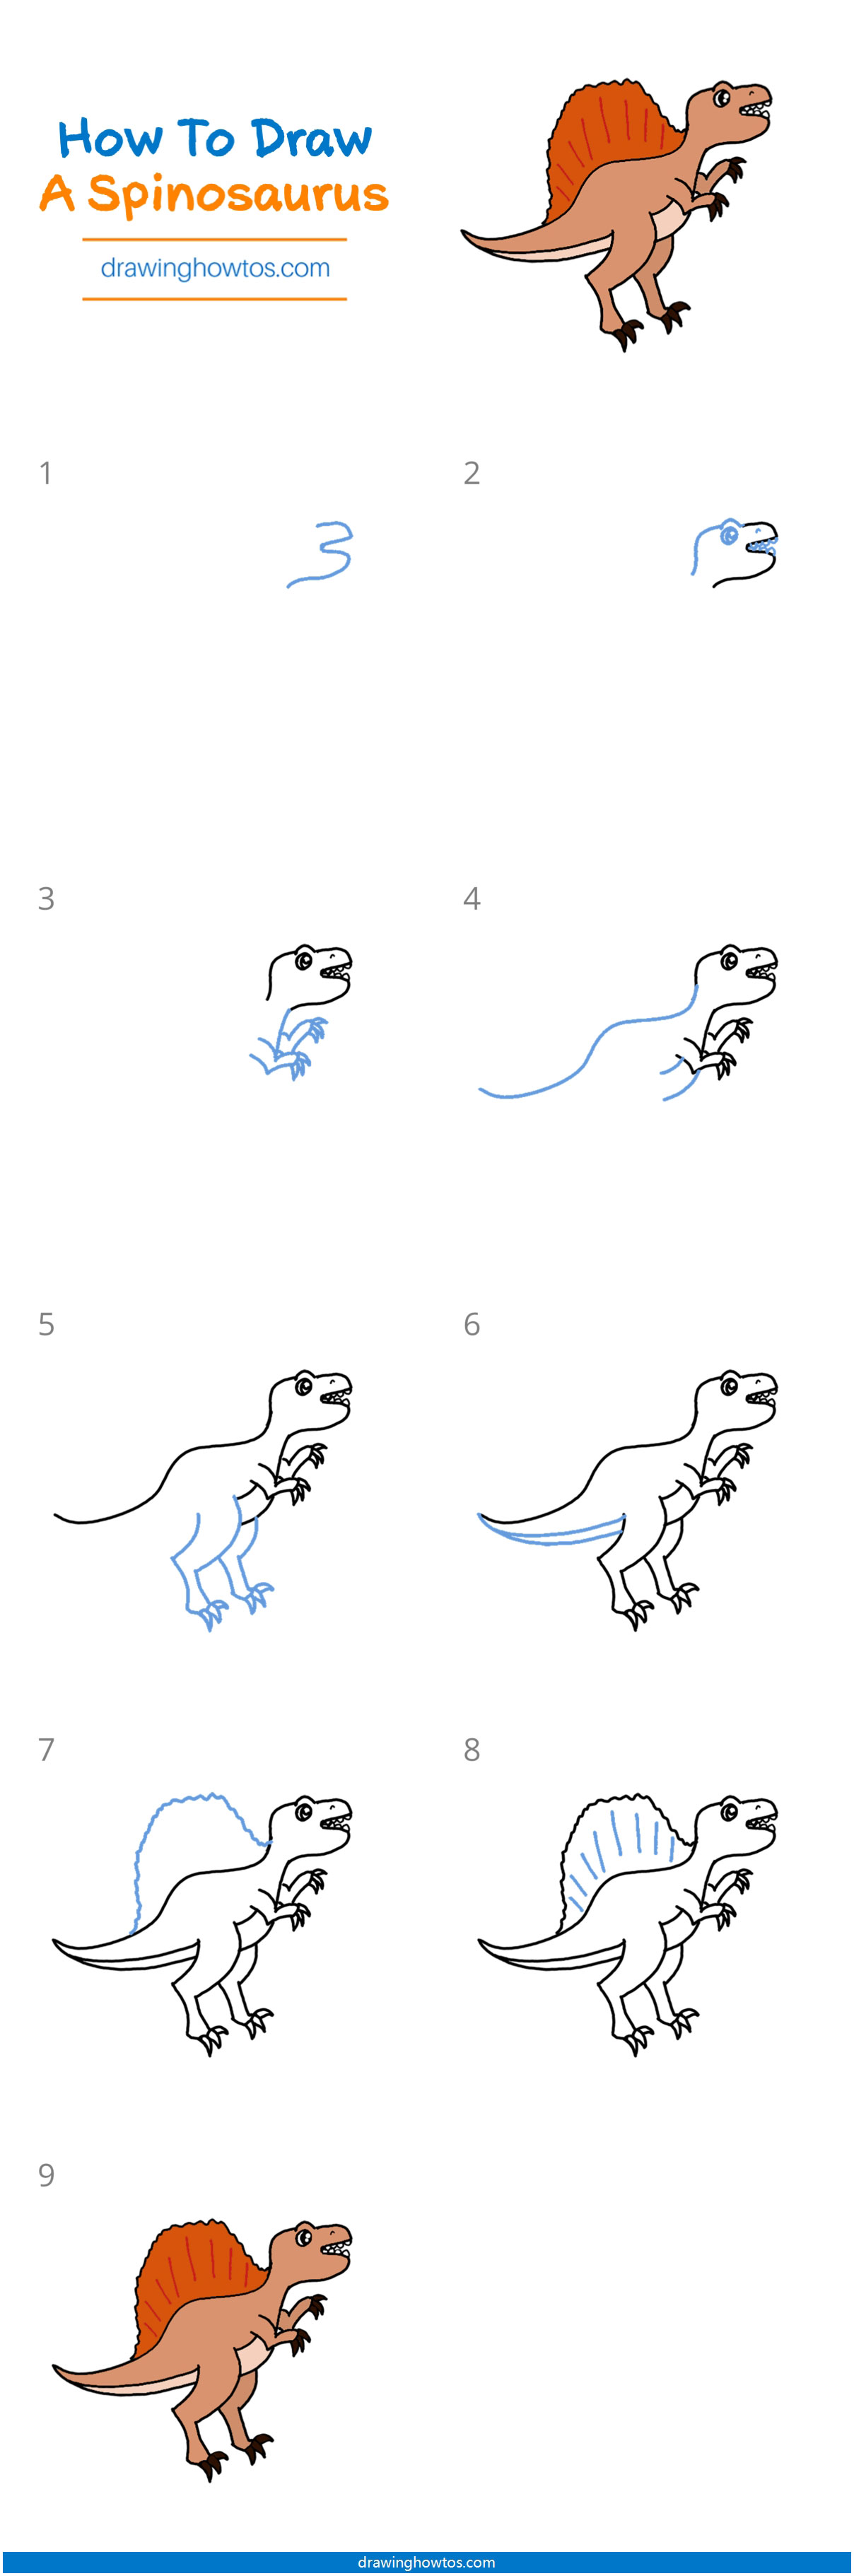 How to Draw a Spinosaurus Step by Step